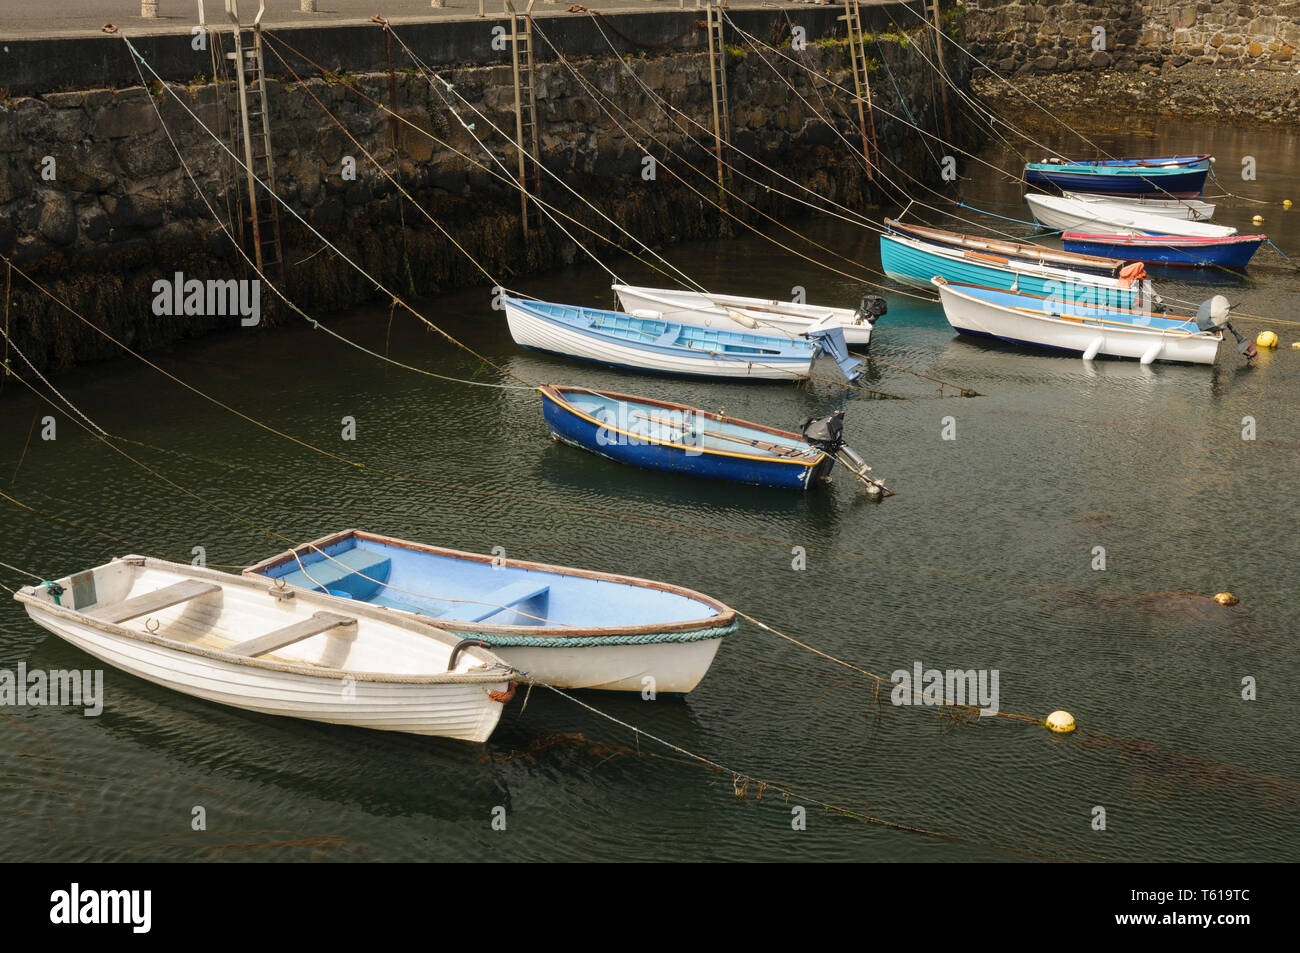 Rowing boats tied up in a harbour Stock Photo